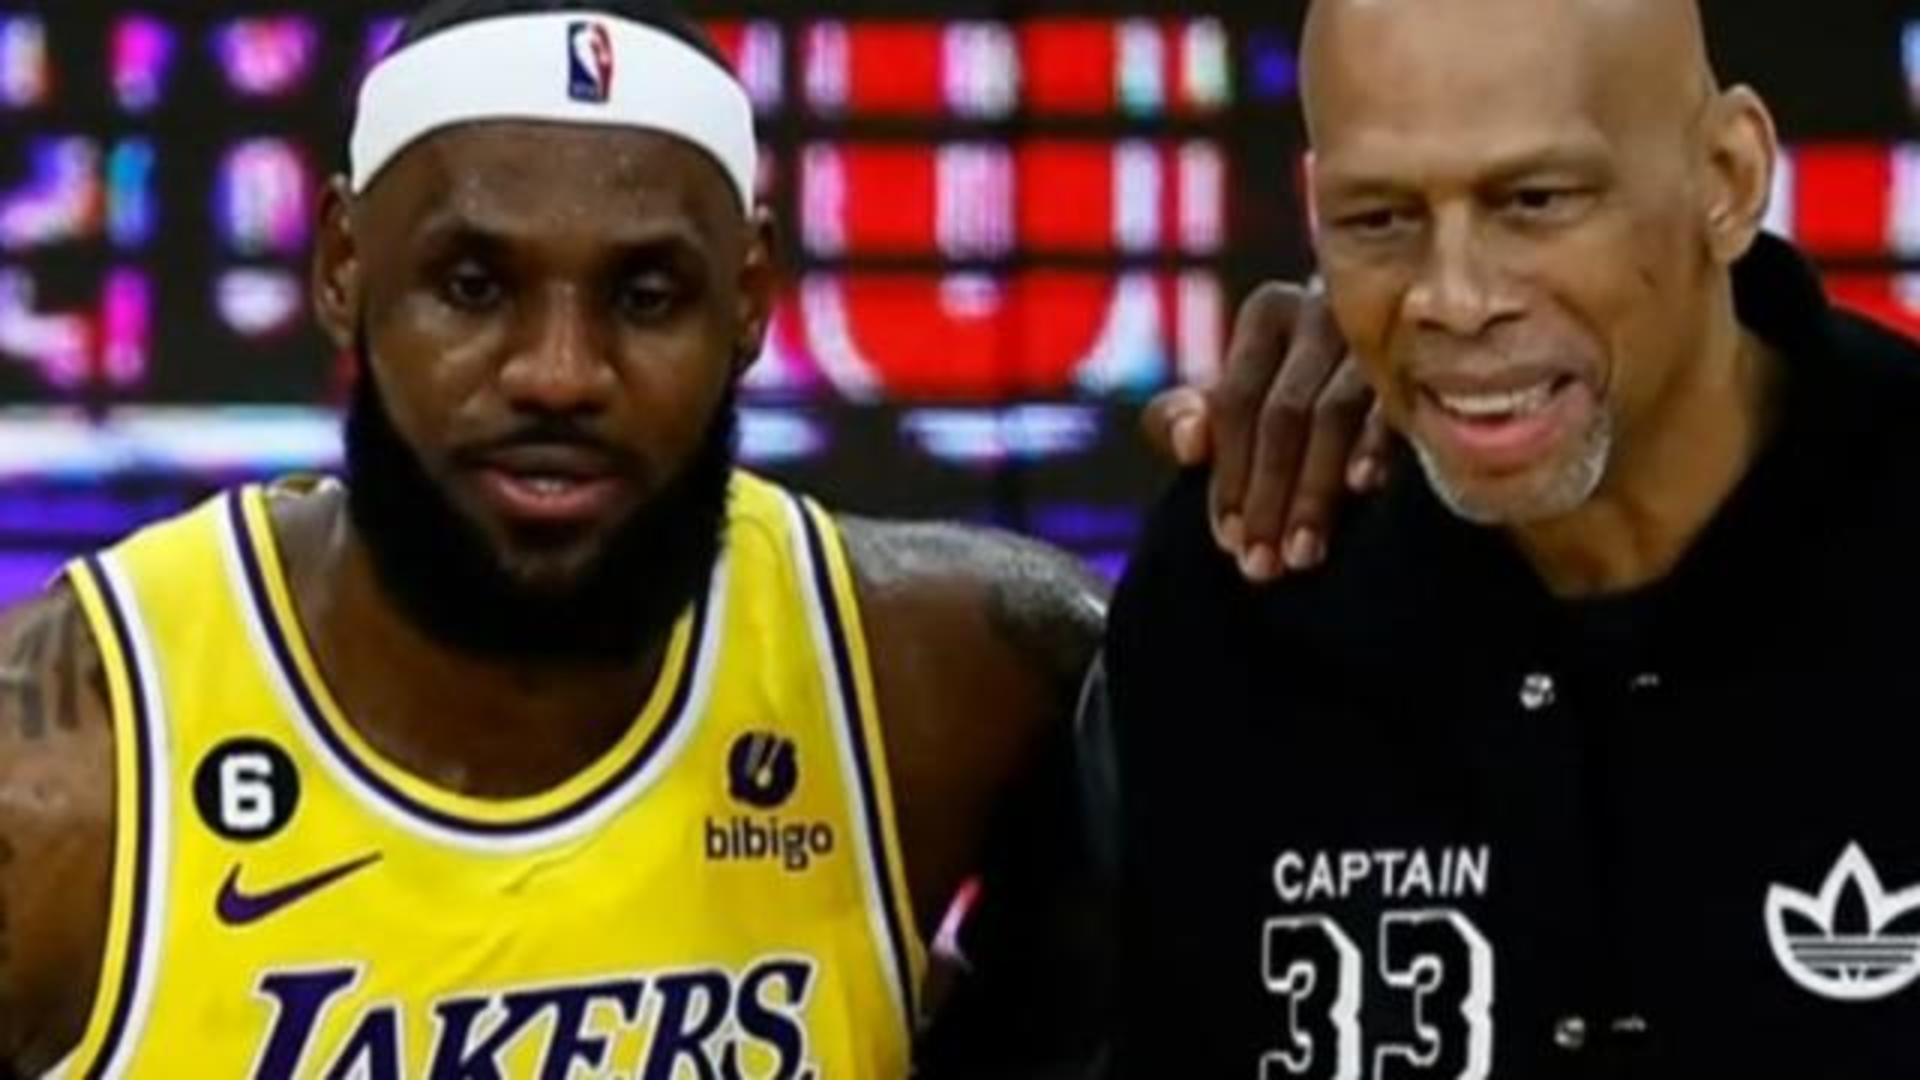 Kareem Abdul-Jabbar says he would have liked LeBron James to play